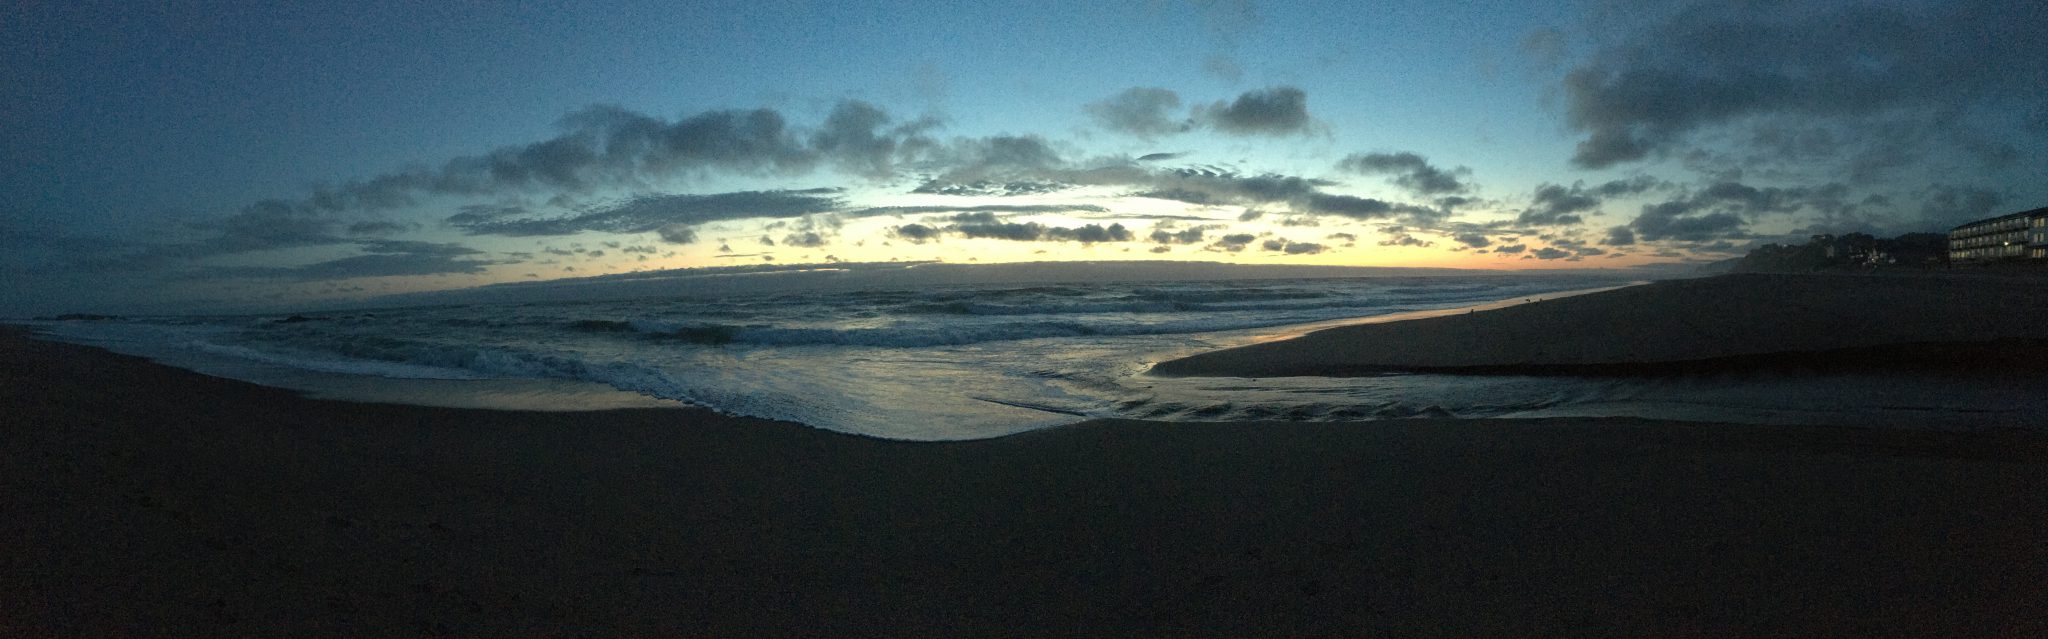 Sunset on the beach - Lincoln City